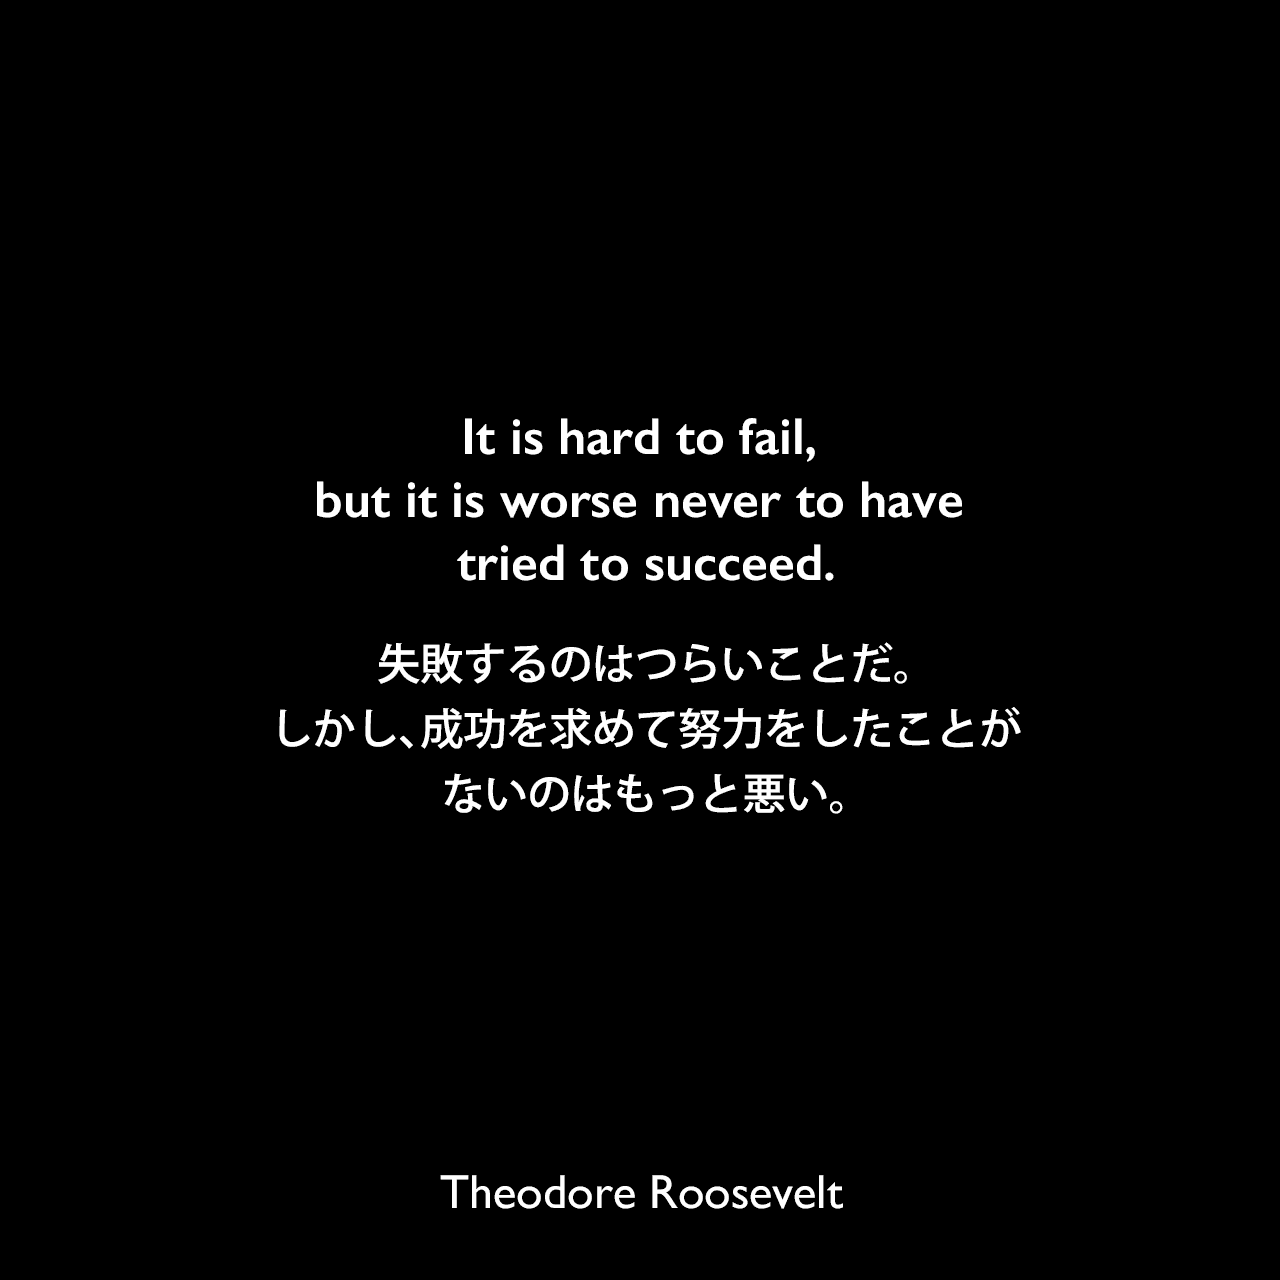 It is hard to fail, but it is worse never to have tried to succeed.失敗するのはつらいことだ。しかし、成功を求めて努力をしたことがないのは、もっと悪い。- 1899年4月10日にイリノイ州シカゴで行われたルーズベルトの演説より